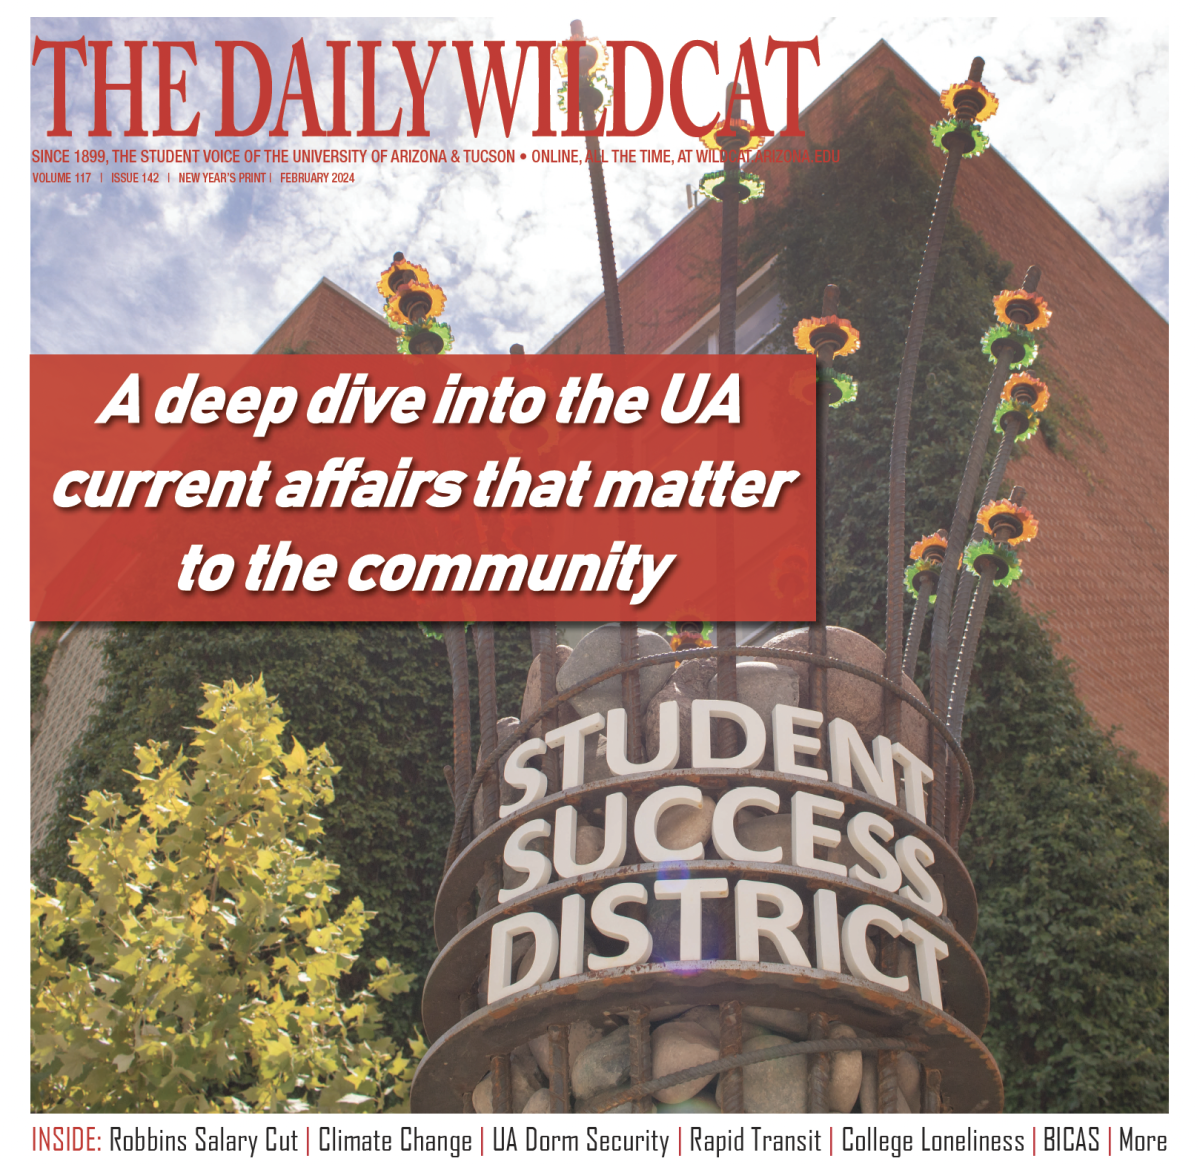 Daily Wildcat | New Years Print Edition | February 2024